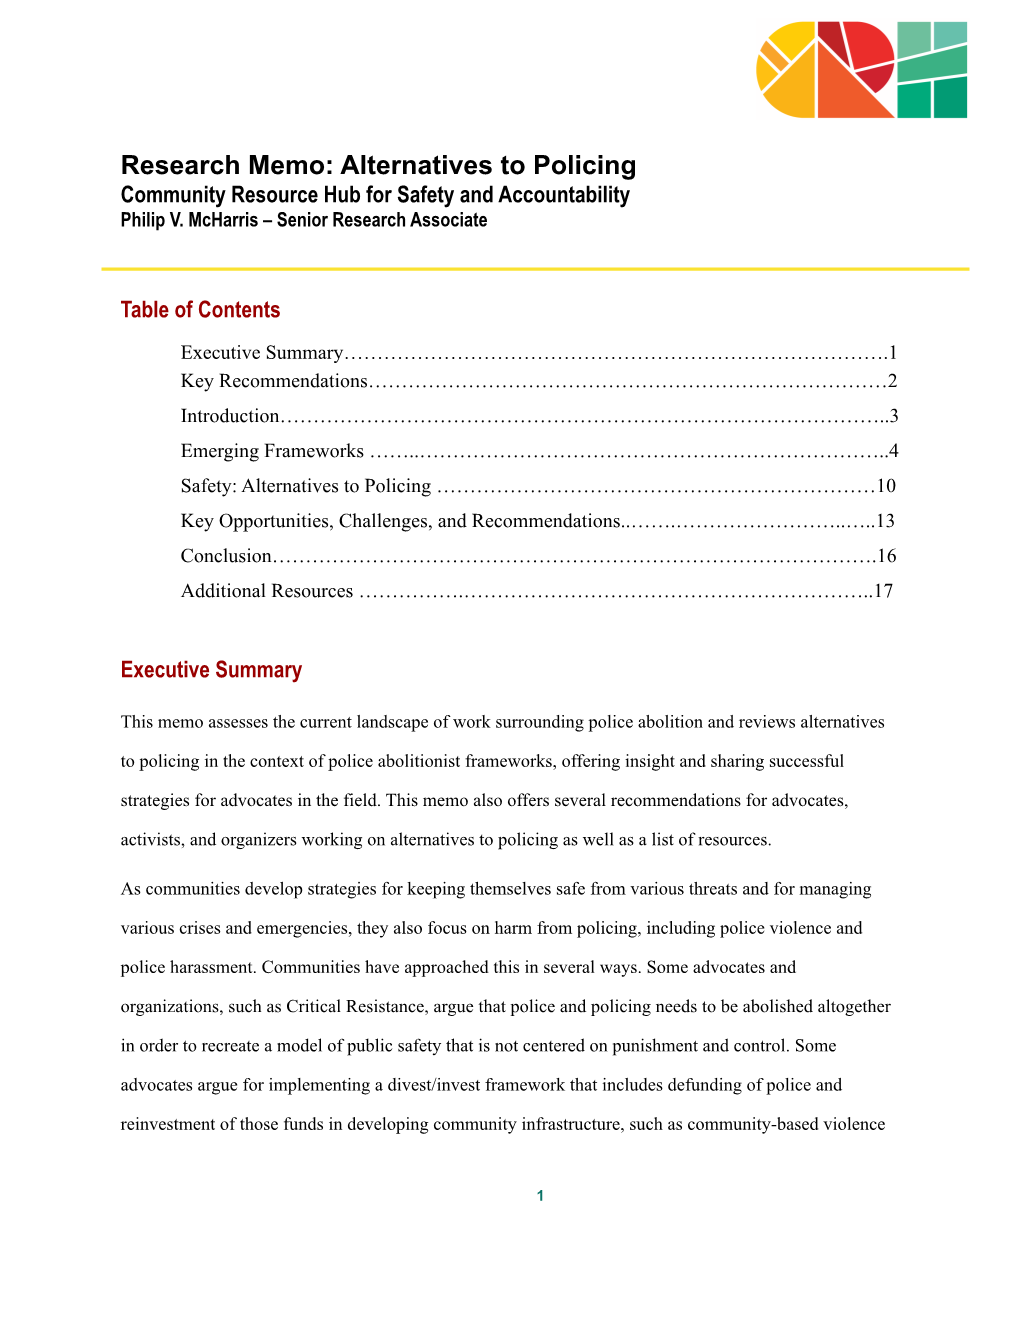 Research Memo: Alternatives to Policing Community Resource Hub for Safety and Accountability Philip V